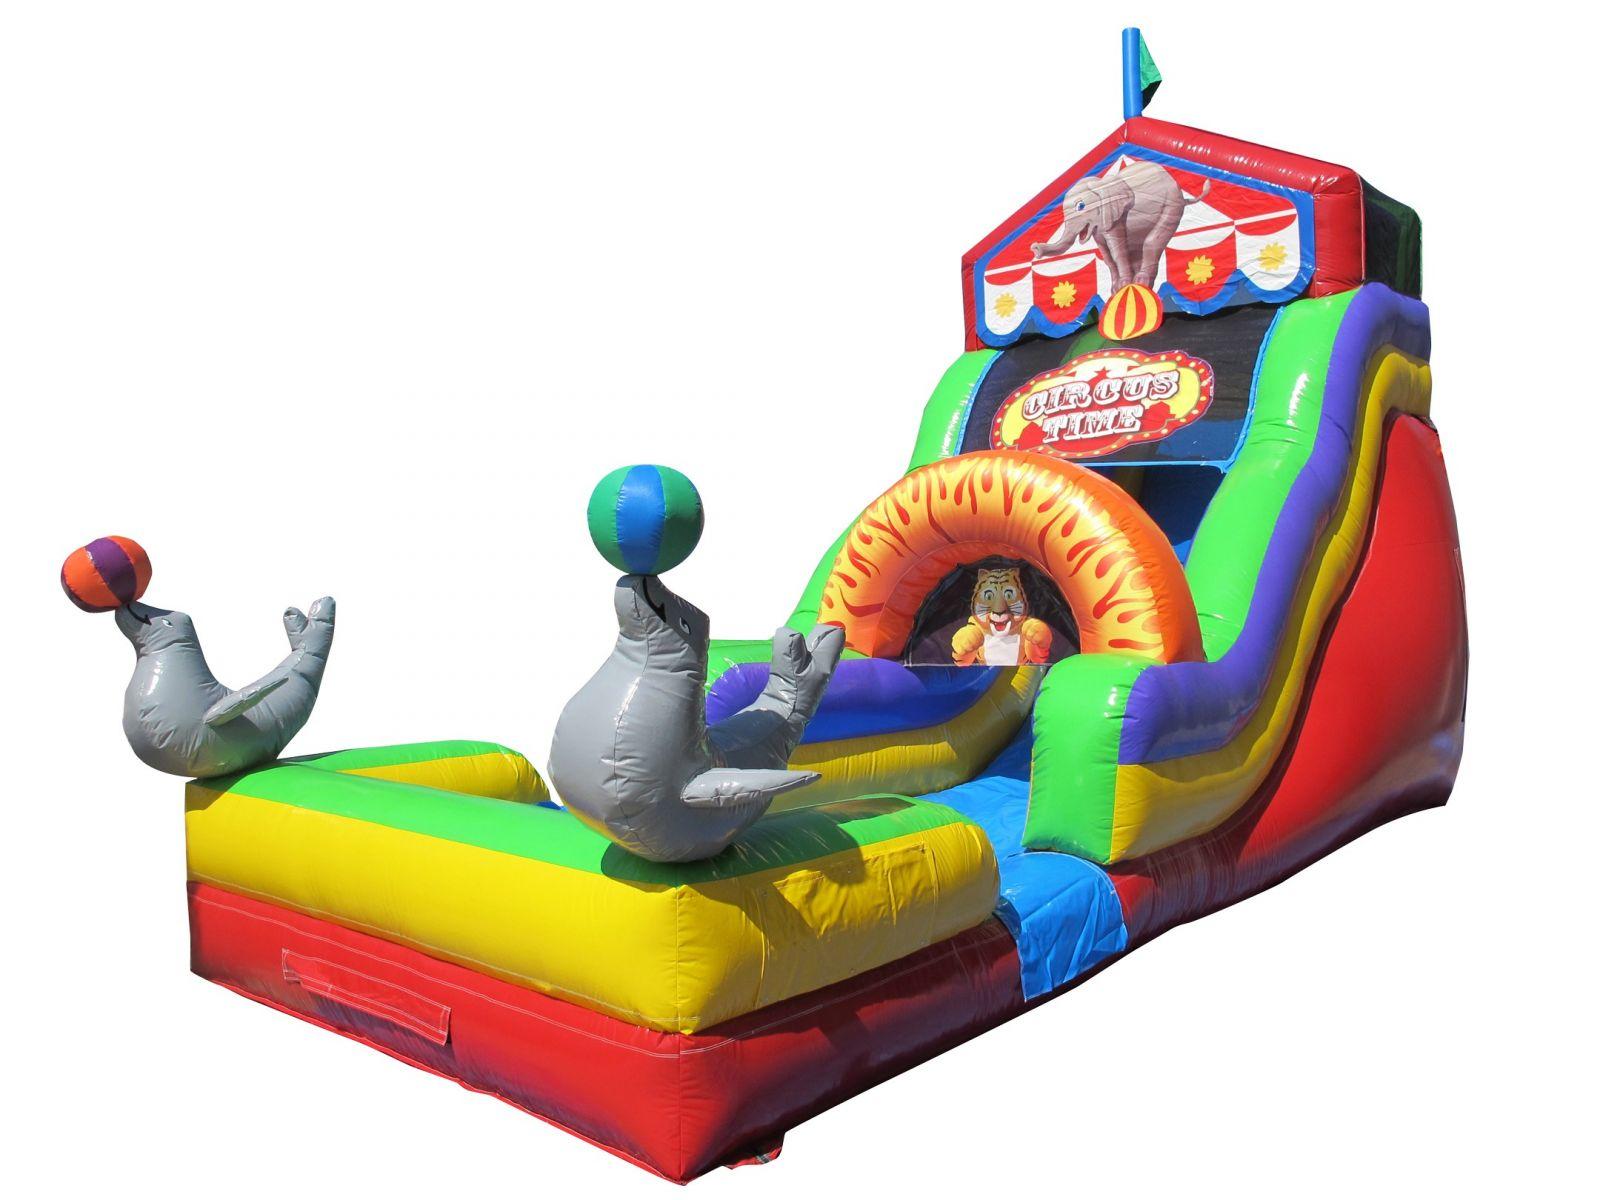 Circus Time Carnival Themed Water slide Inflatable Rental Chicago IL